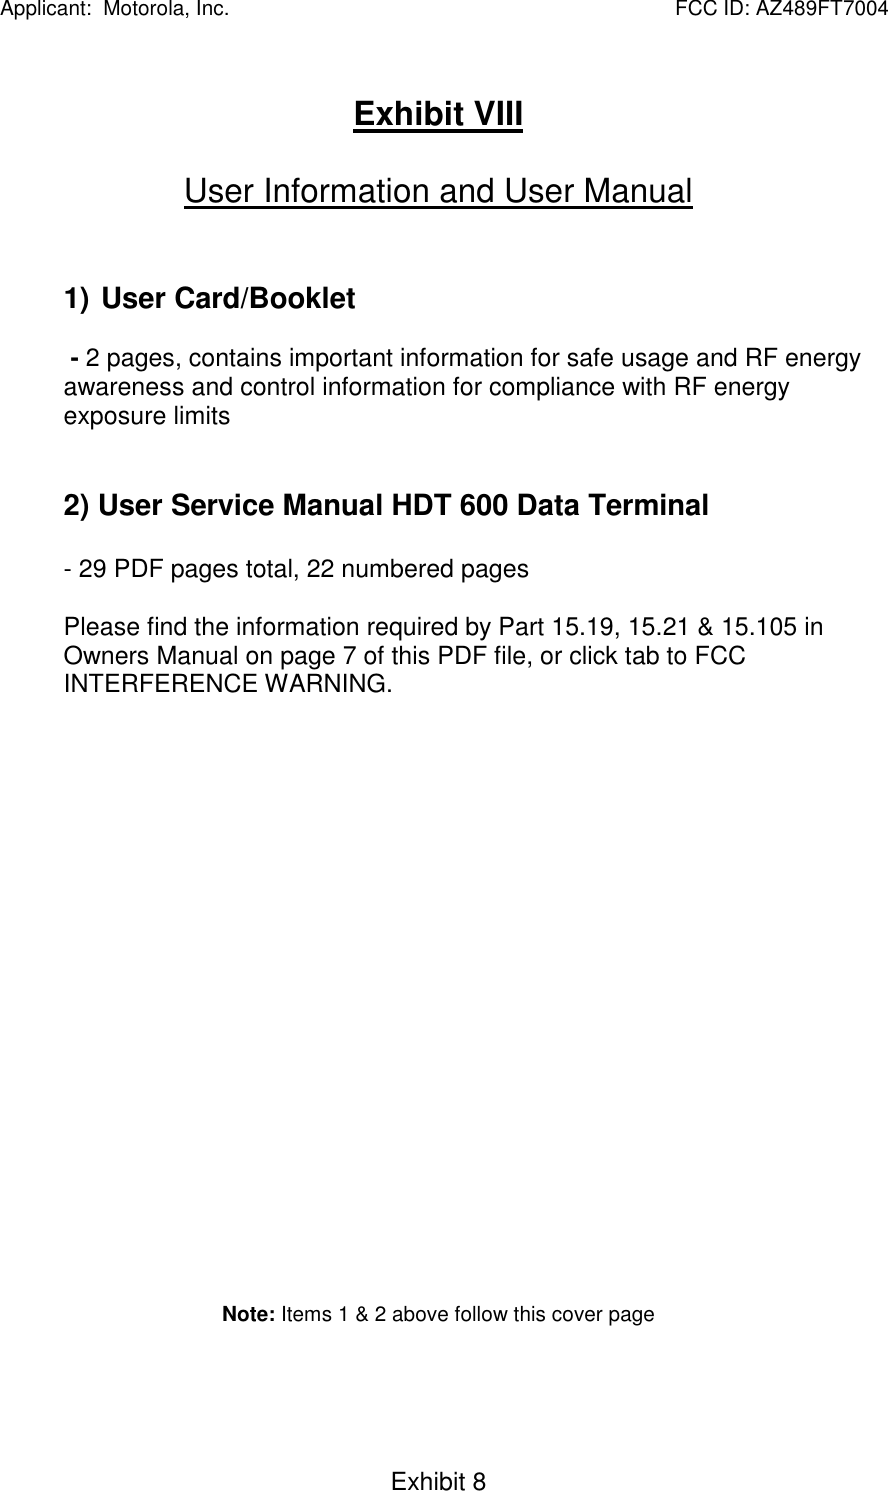   Applicant:  Motorola, Inc.                                                      FCC ID: AZ489FT7004Exhibit 8Exhibit VIIIUser Information and User Manual1) User Card/Booklet - 2 pages, contains important information for safe usage and RF energyawareness and control information for compliance with RF energyexposure limits2) User Service Manual HDT 600 Data Terminal- 29 PDF pages total, 22 numbered pagesPlease find the information required by Part 15.19, 15.21 &amp; 15.105 inOwners Manual on page 7 of this PDF file, or click tab to FCCINTERFERENCE WARNING.Note: Items 1 &amp; 2 above follow this cover page